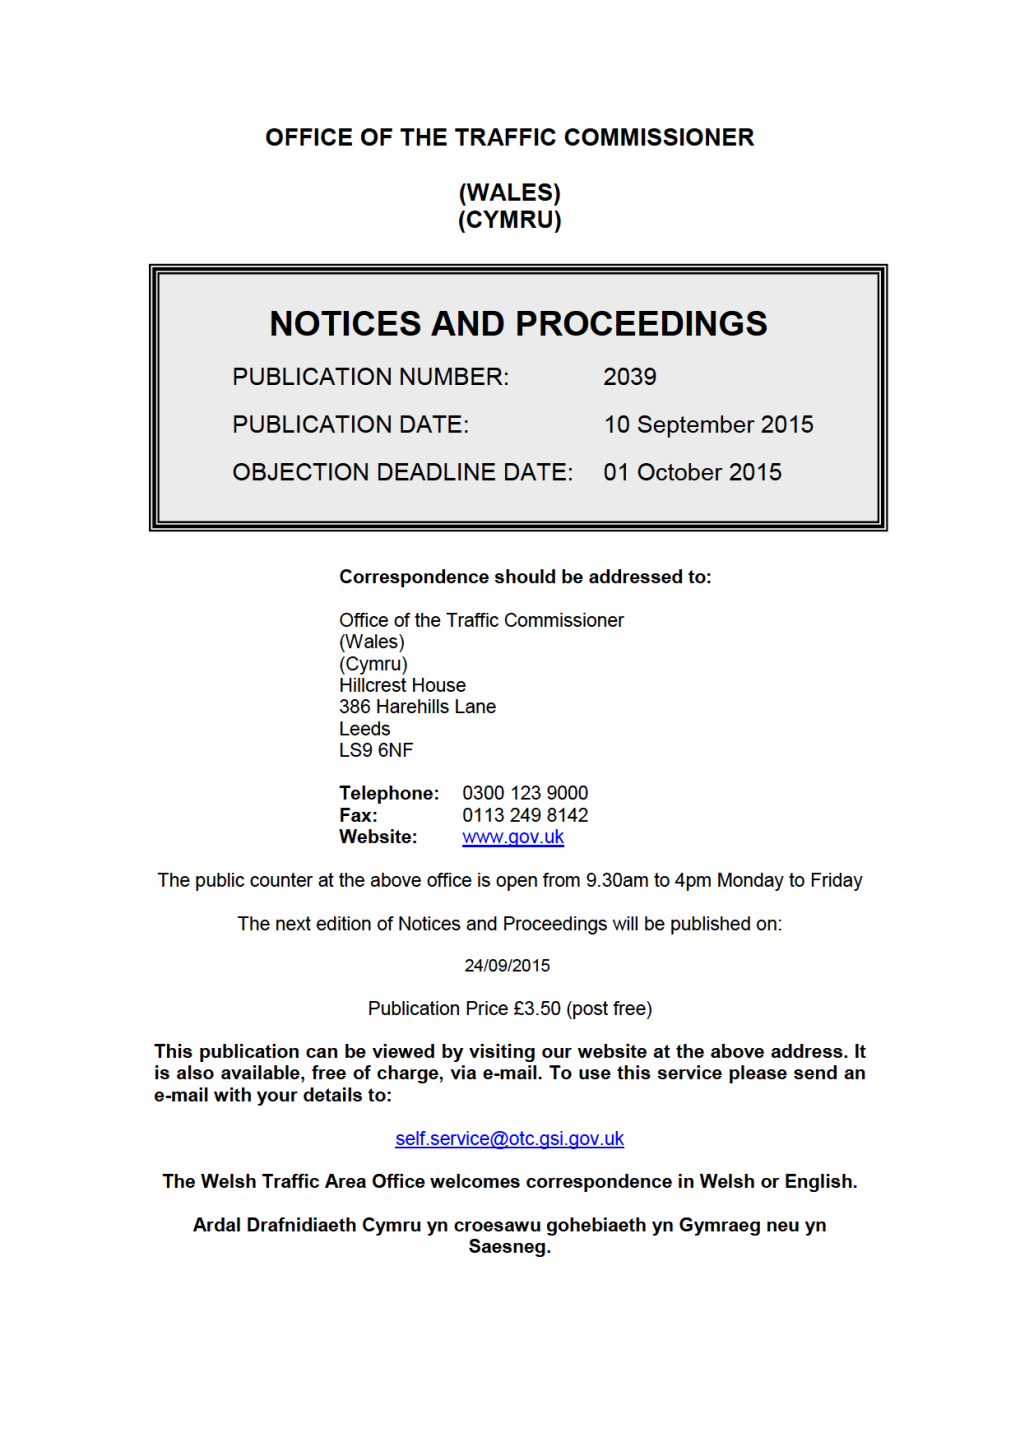 NOTICES and PROCEEDINGS 10 September 2015